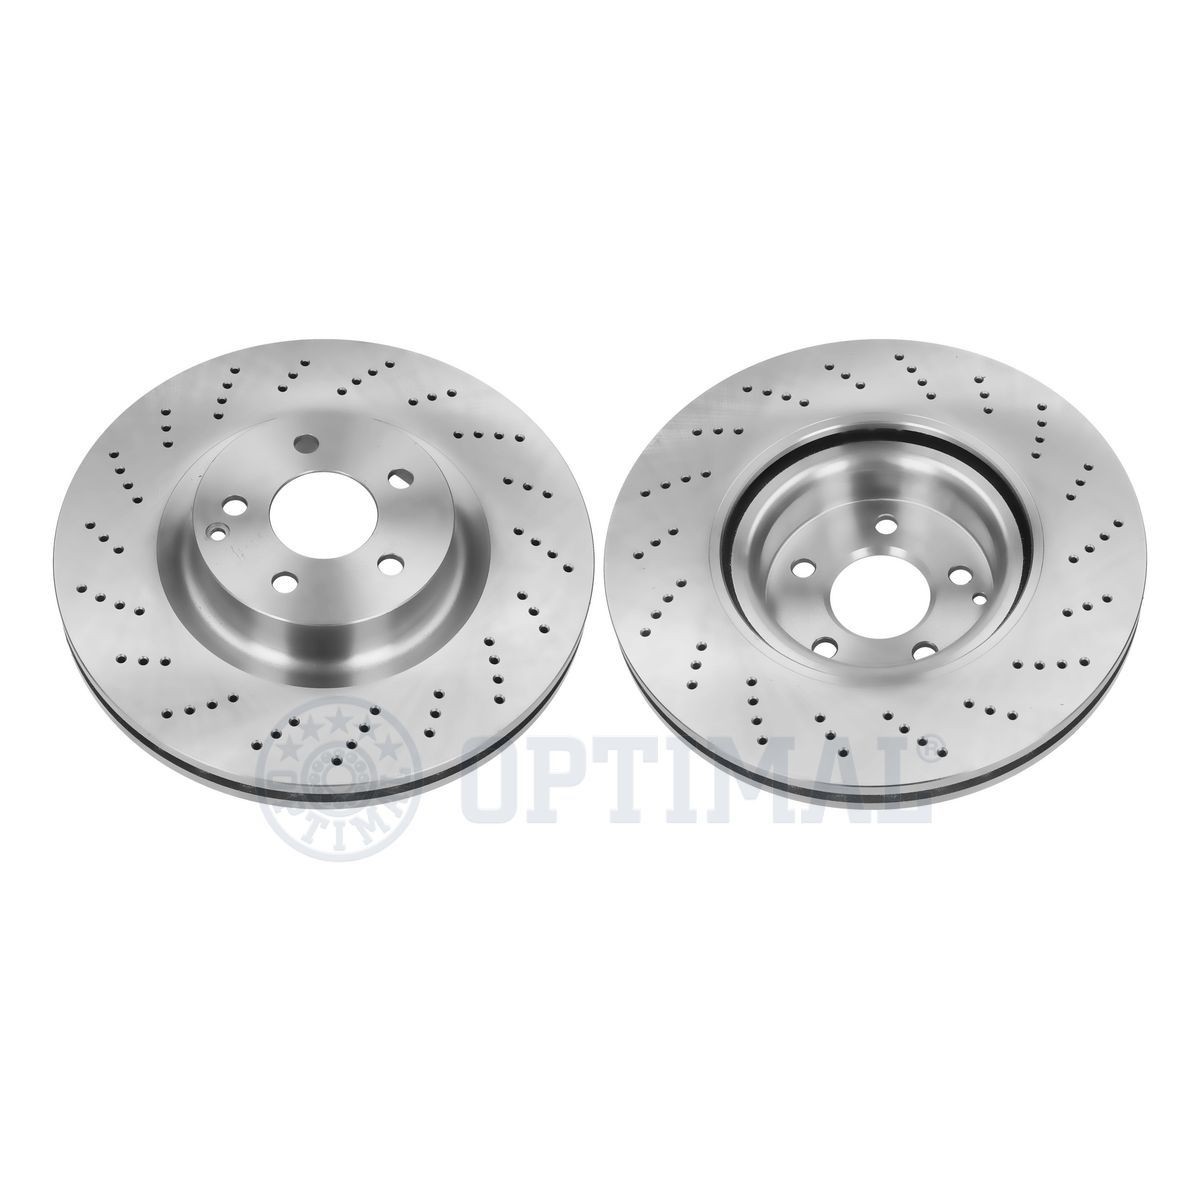 OPTIMAL Front Axle, 344x32mm, 5/6, Vented, Coated, High-carbon Ø: 344mm, Brake Disc Thickness: 32mm Brake rotor BS-8670HC buy